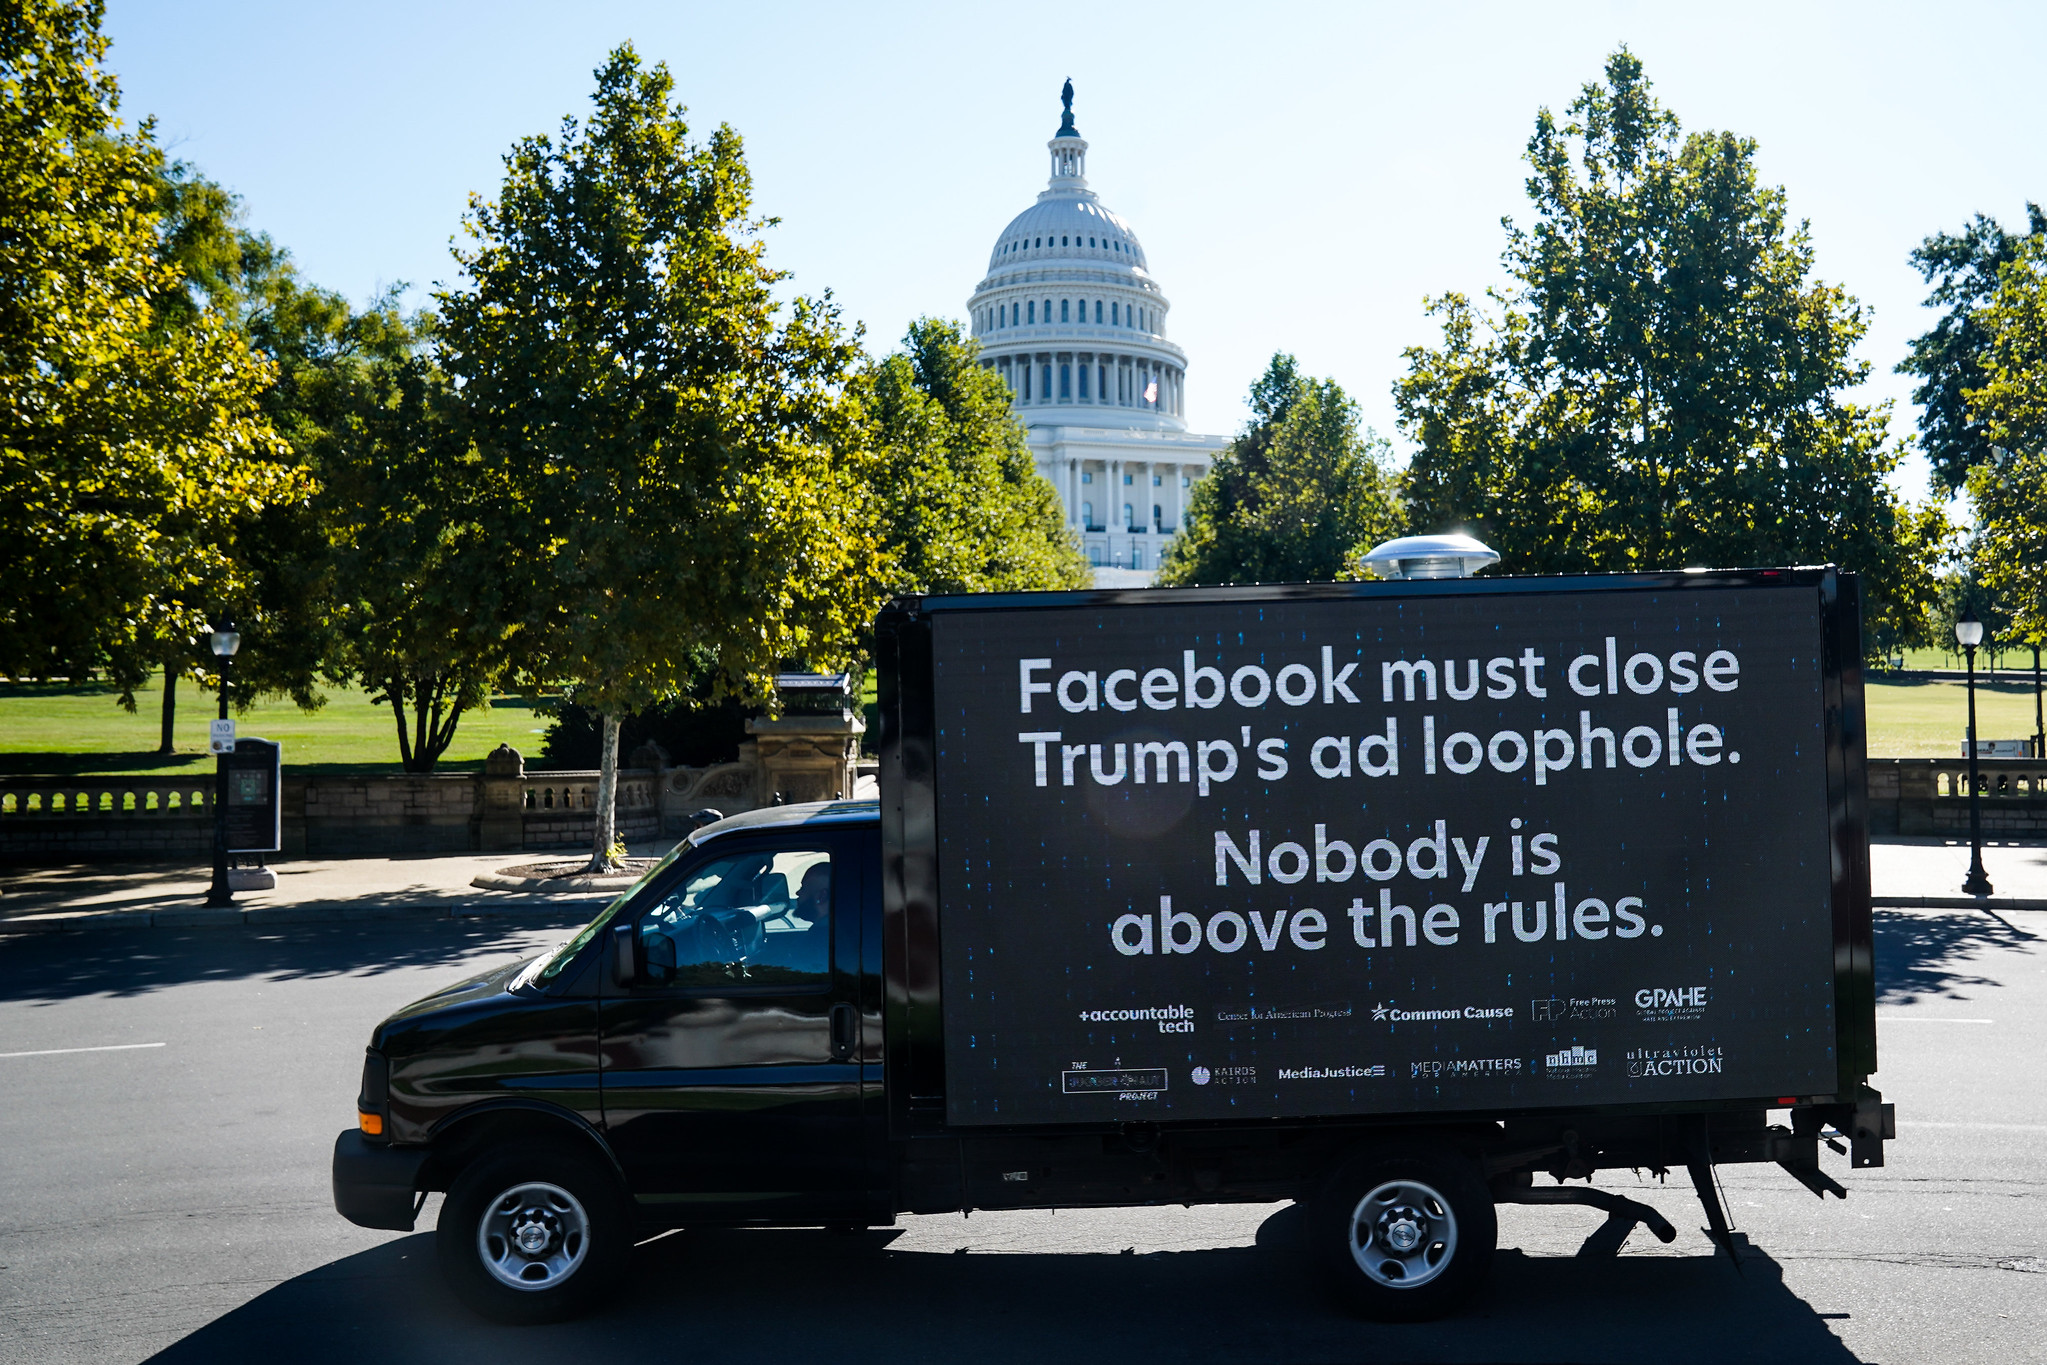 Mobile billboard reading "Facebook must close Trump's ad loophole. Nobody is above the rules."